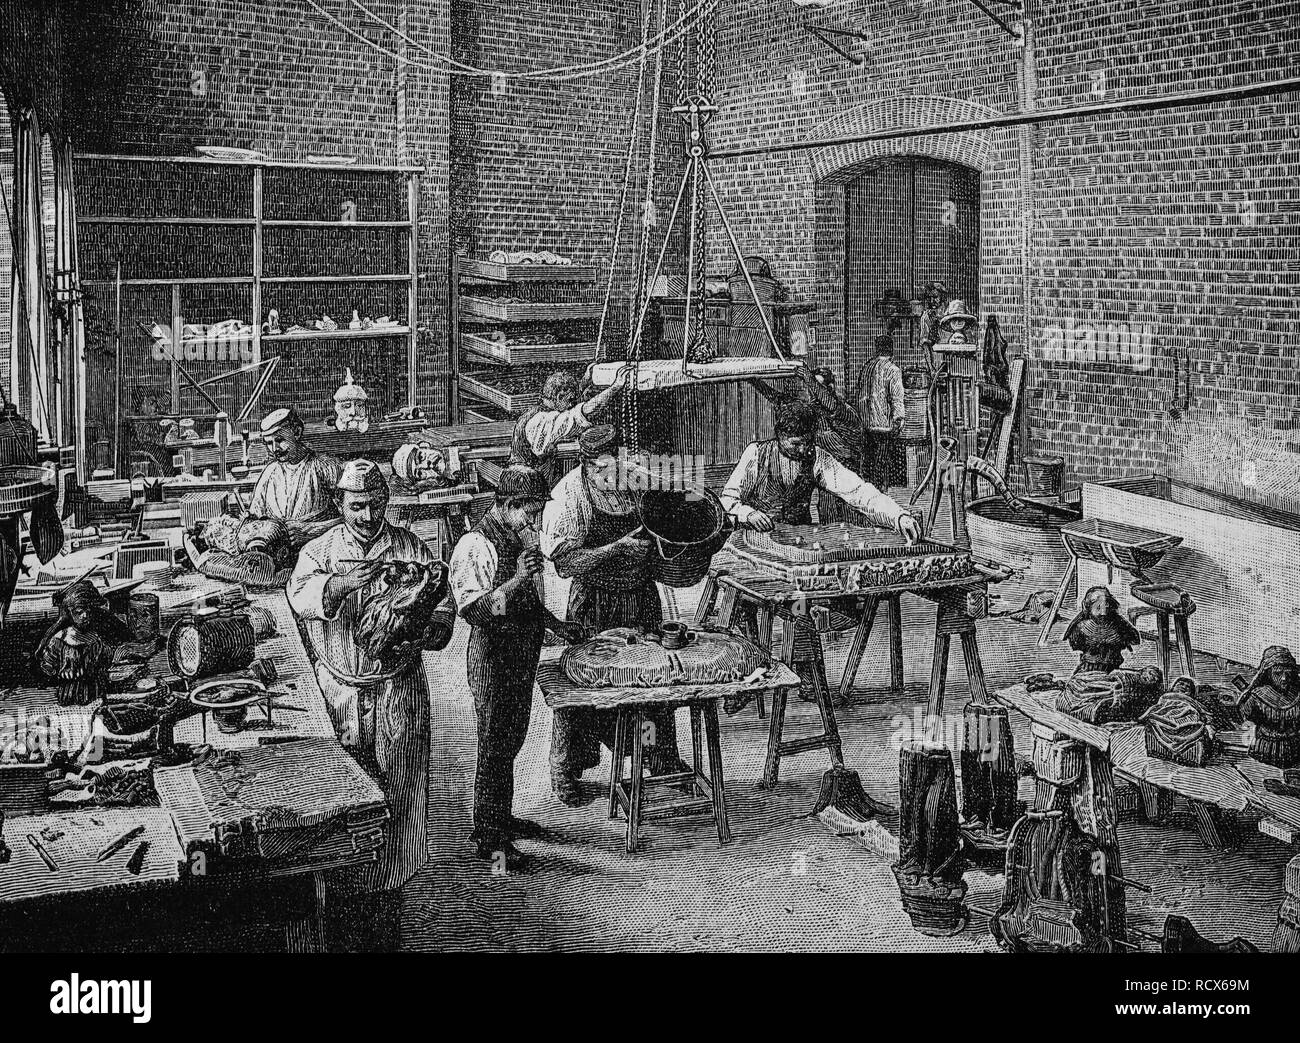 Sculpting workshop, production of wax models, wood engraving, about 1880 Stock Photo